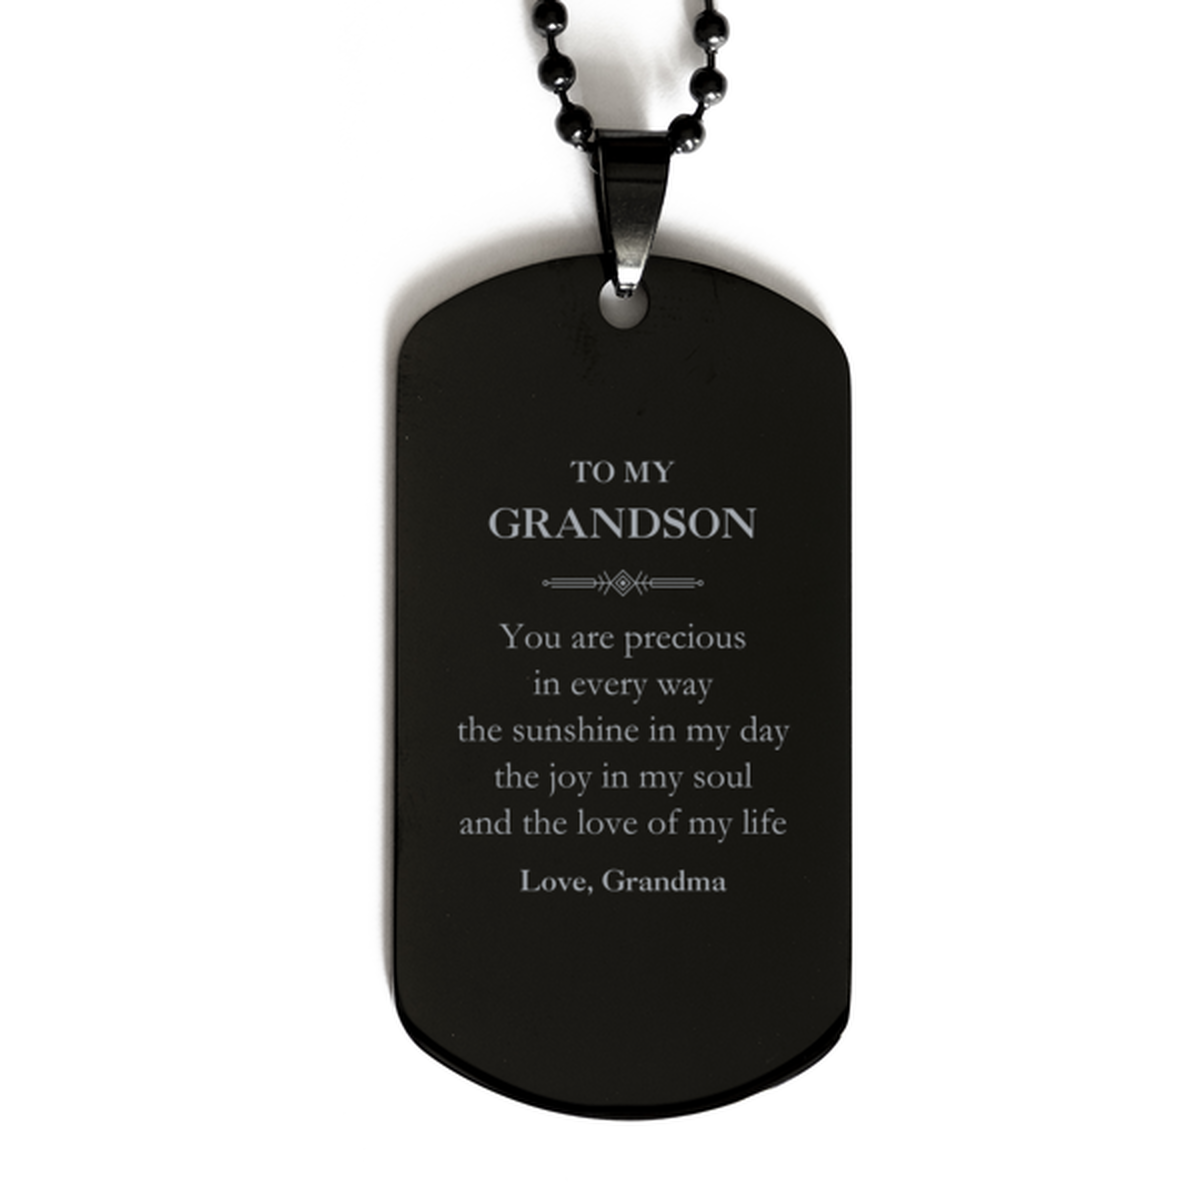 Graduation Gifts for Grandson Black Dog Tag Present from Grandma, Christmas Grandson Birthday Gifts Grandson You are precious in every way the sunshine in my day. Love, Grandma